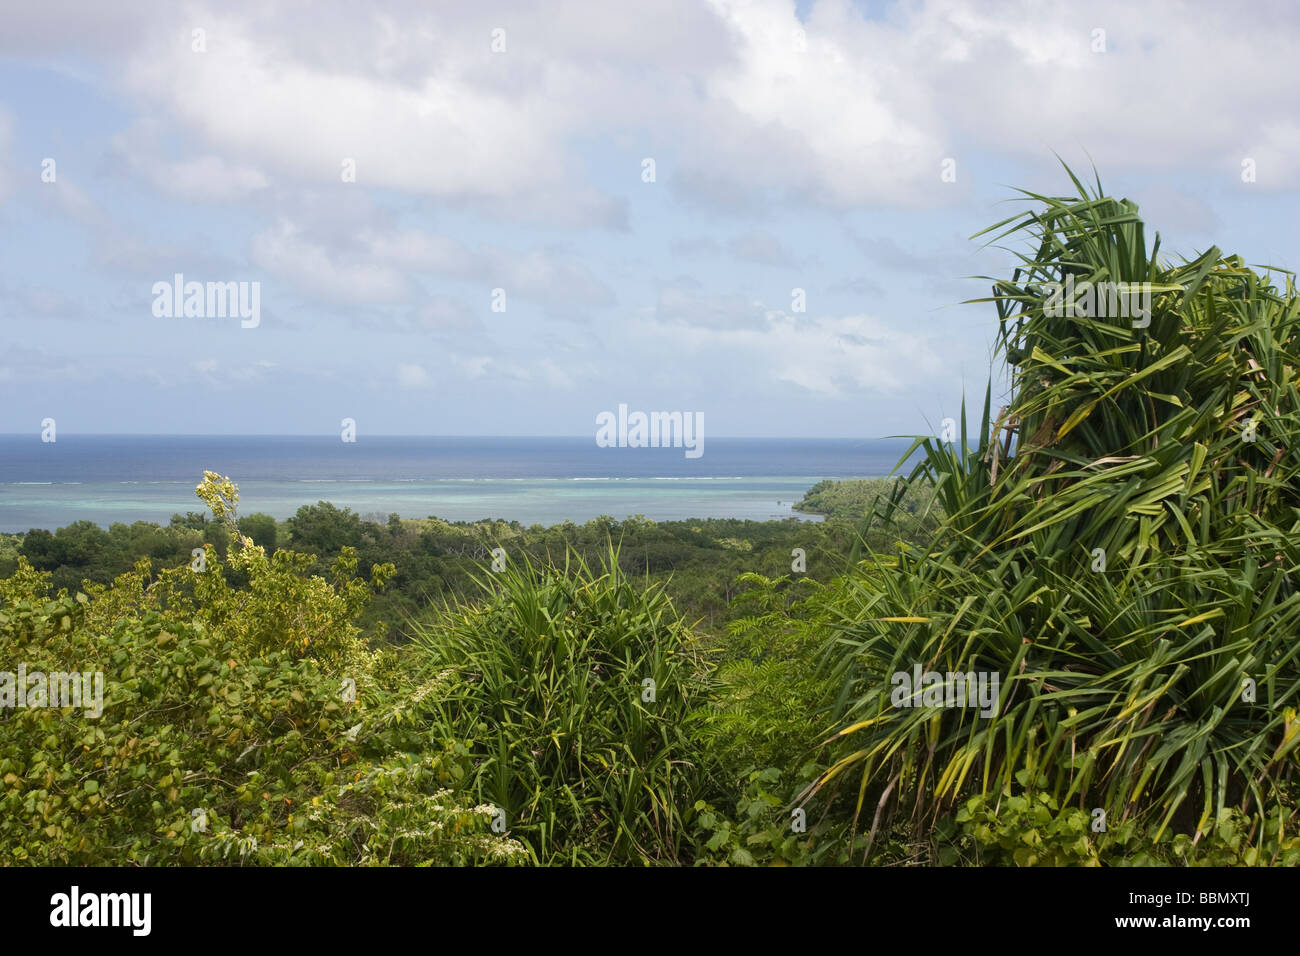 The landscape of the island of Yap, Micronesia Stock Photo